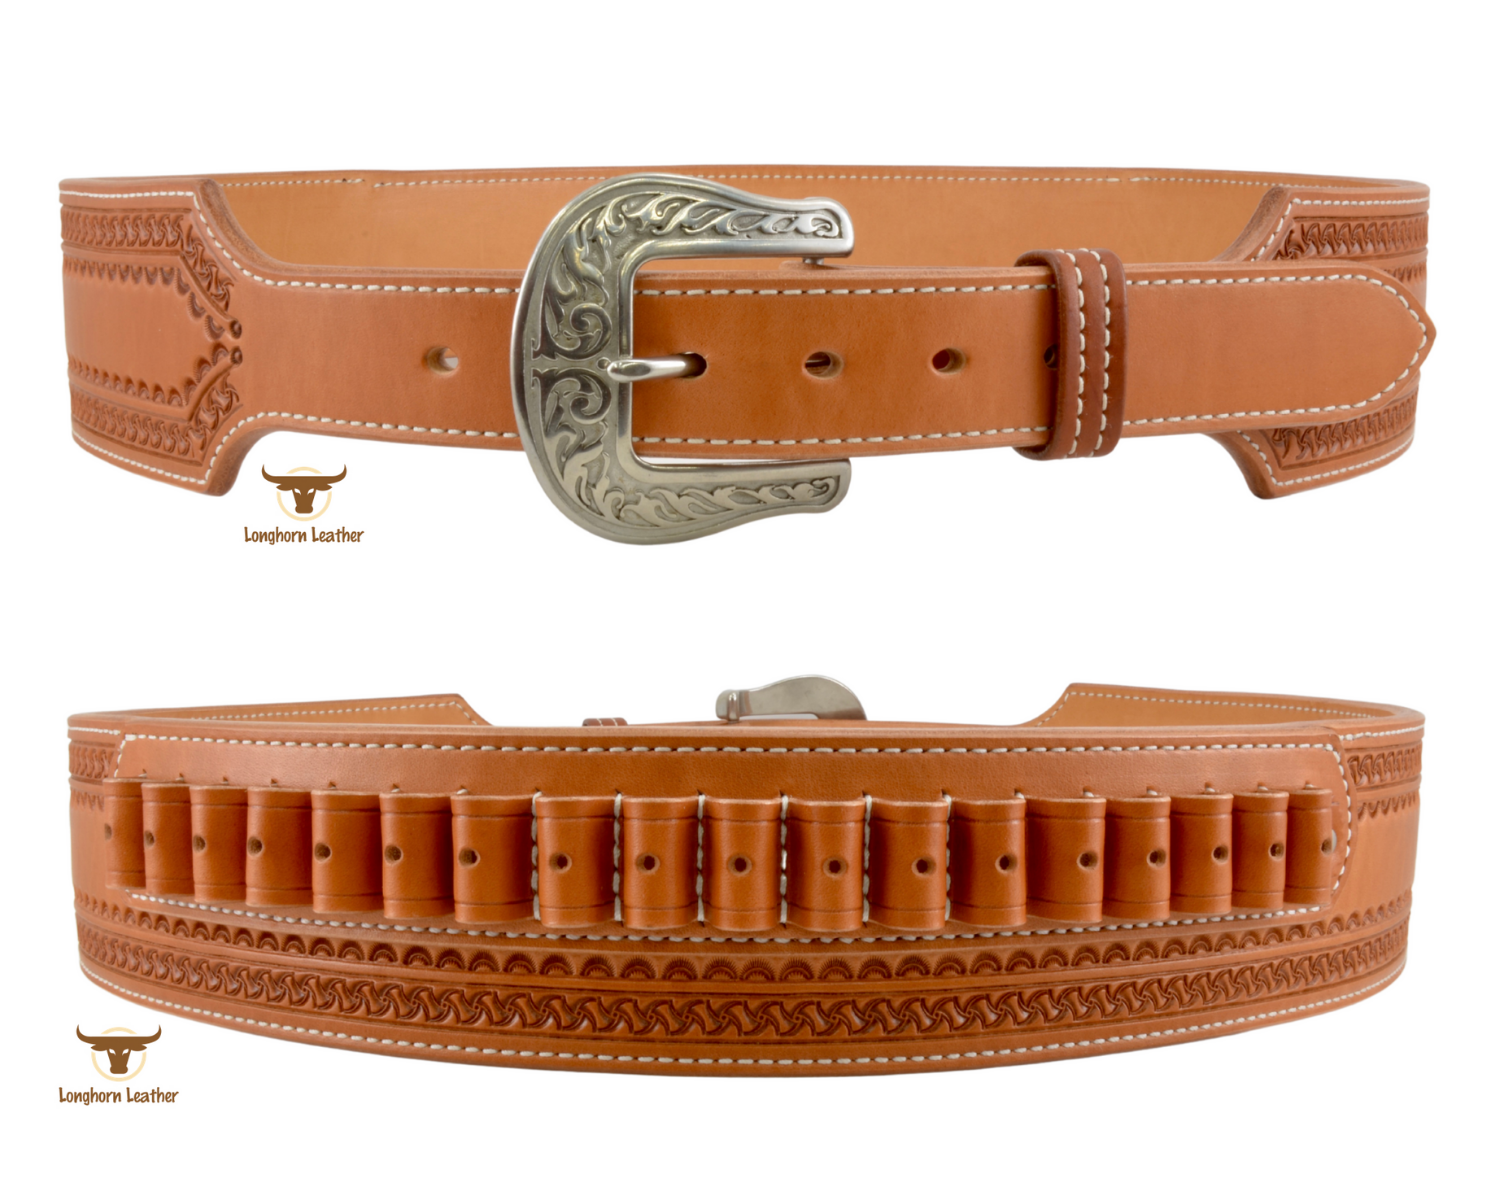 Custom leather cartridge belt featuring the "Kingman" design.  Individually handcrafted at Longhorn Leather AZ.